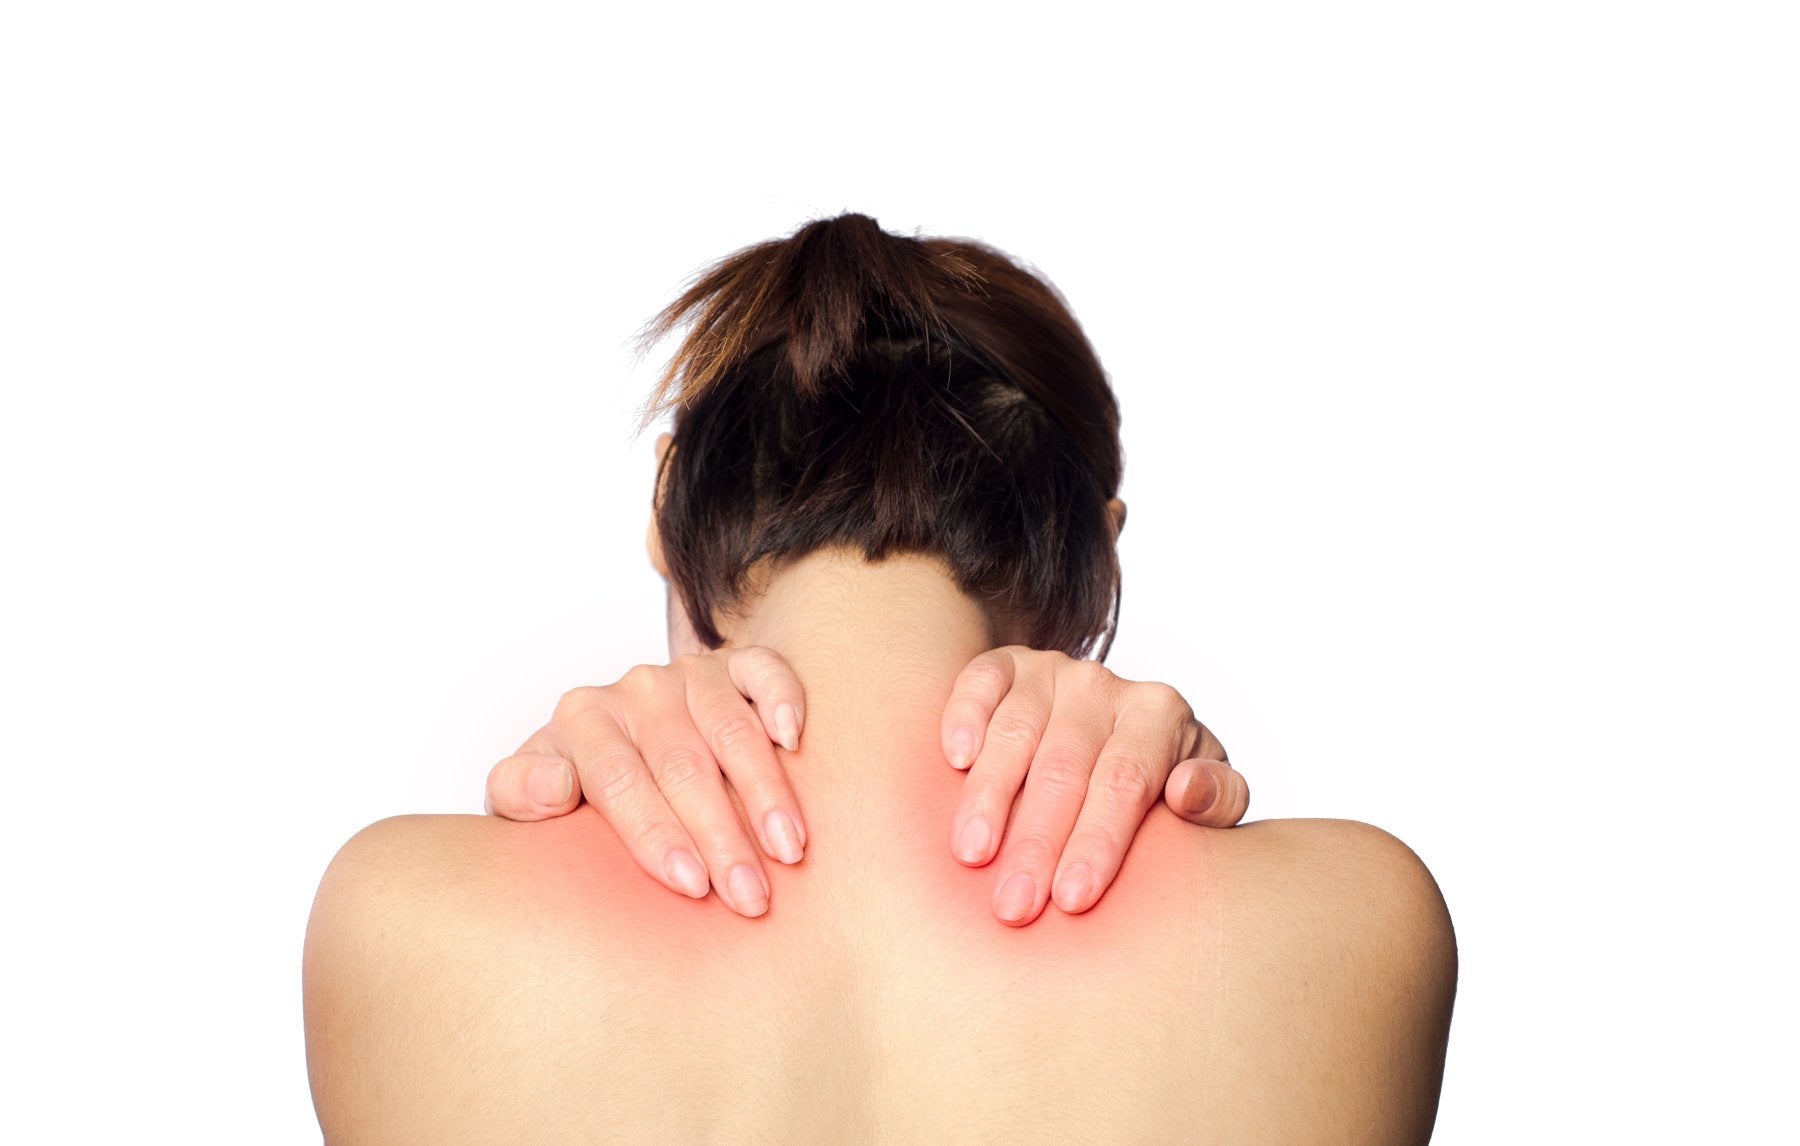 How Massage Can Help Alleviate Knots & Pain in the Neck & Shoulder Area